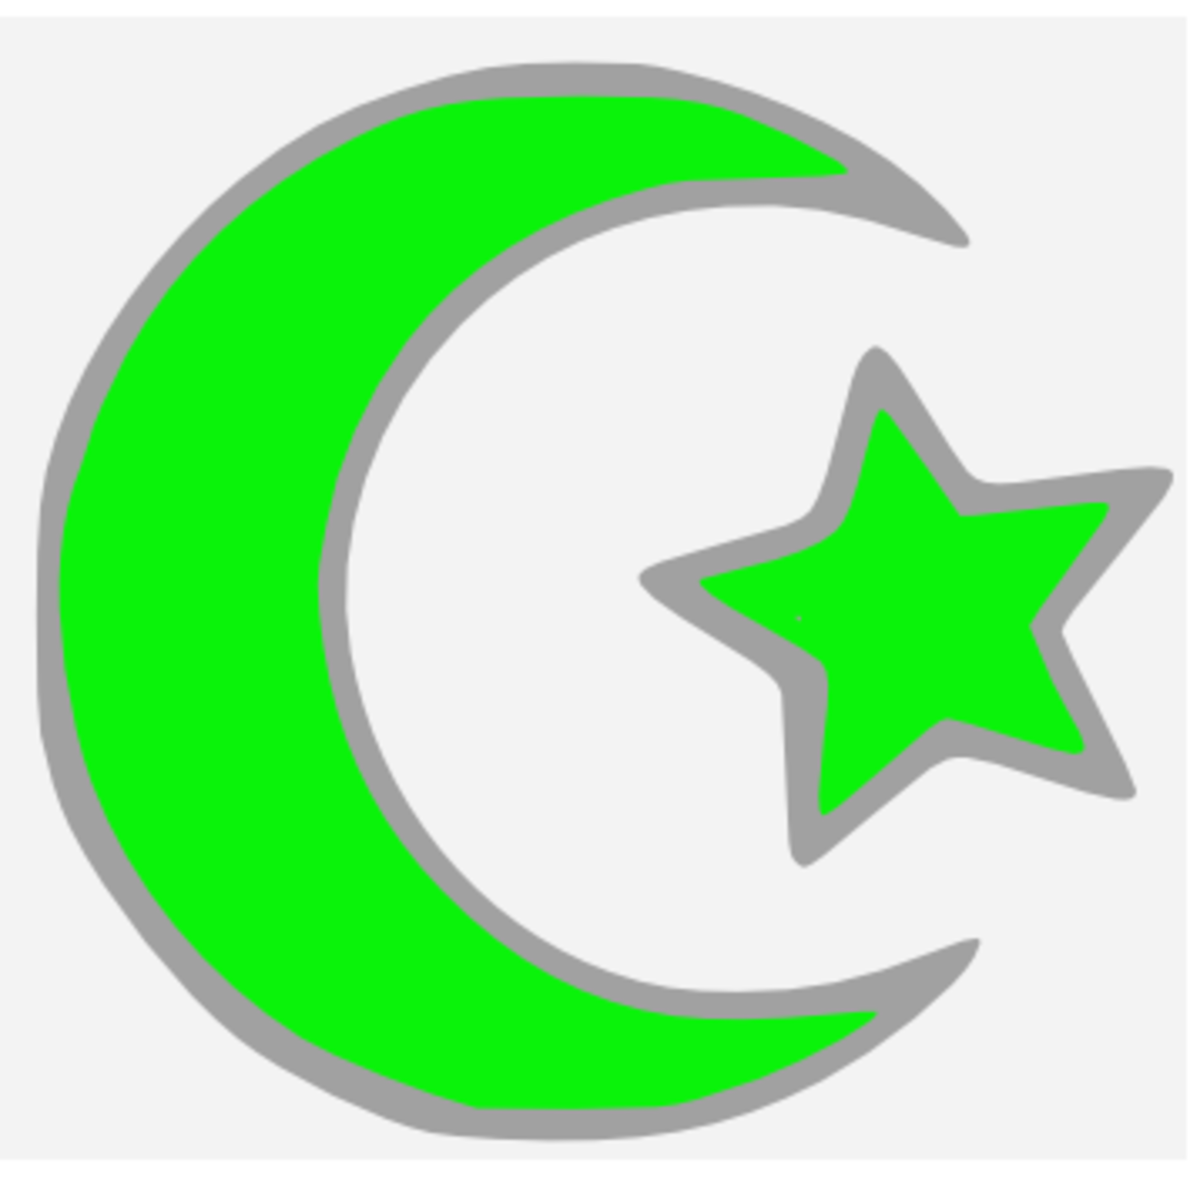 Symbol of Islam. What do you feel when you see it?